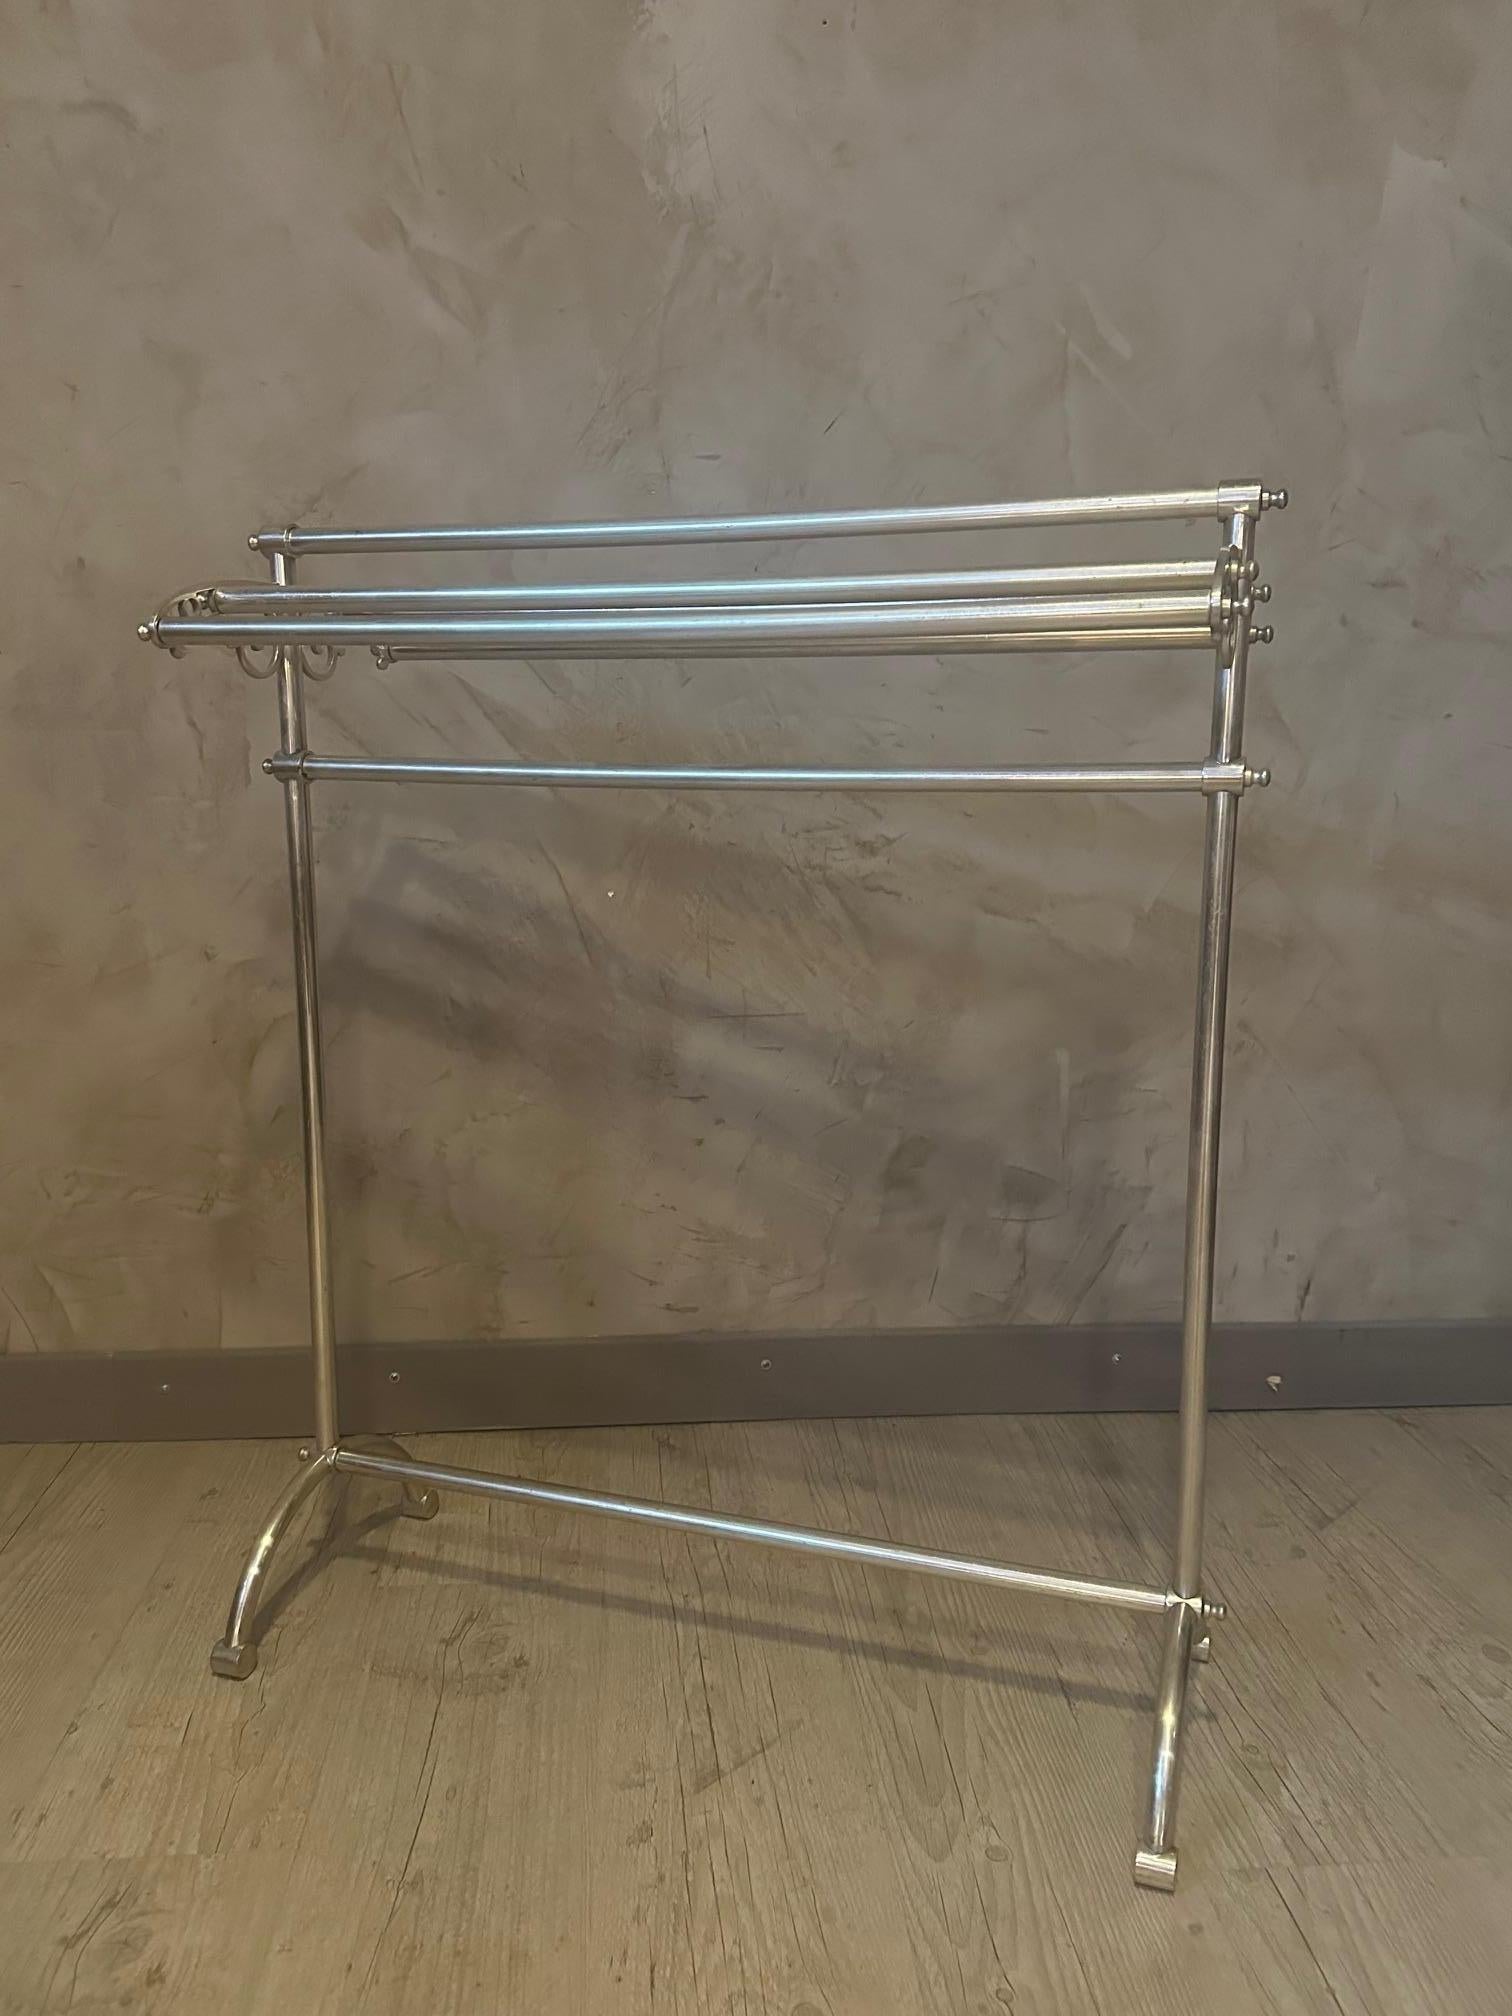 Free-standing towel rack in chrome metal dating from the 70s.
In good condition. Fully removable.
Nice quality.